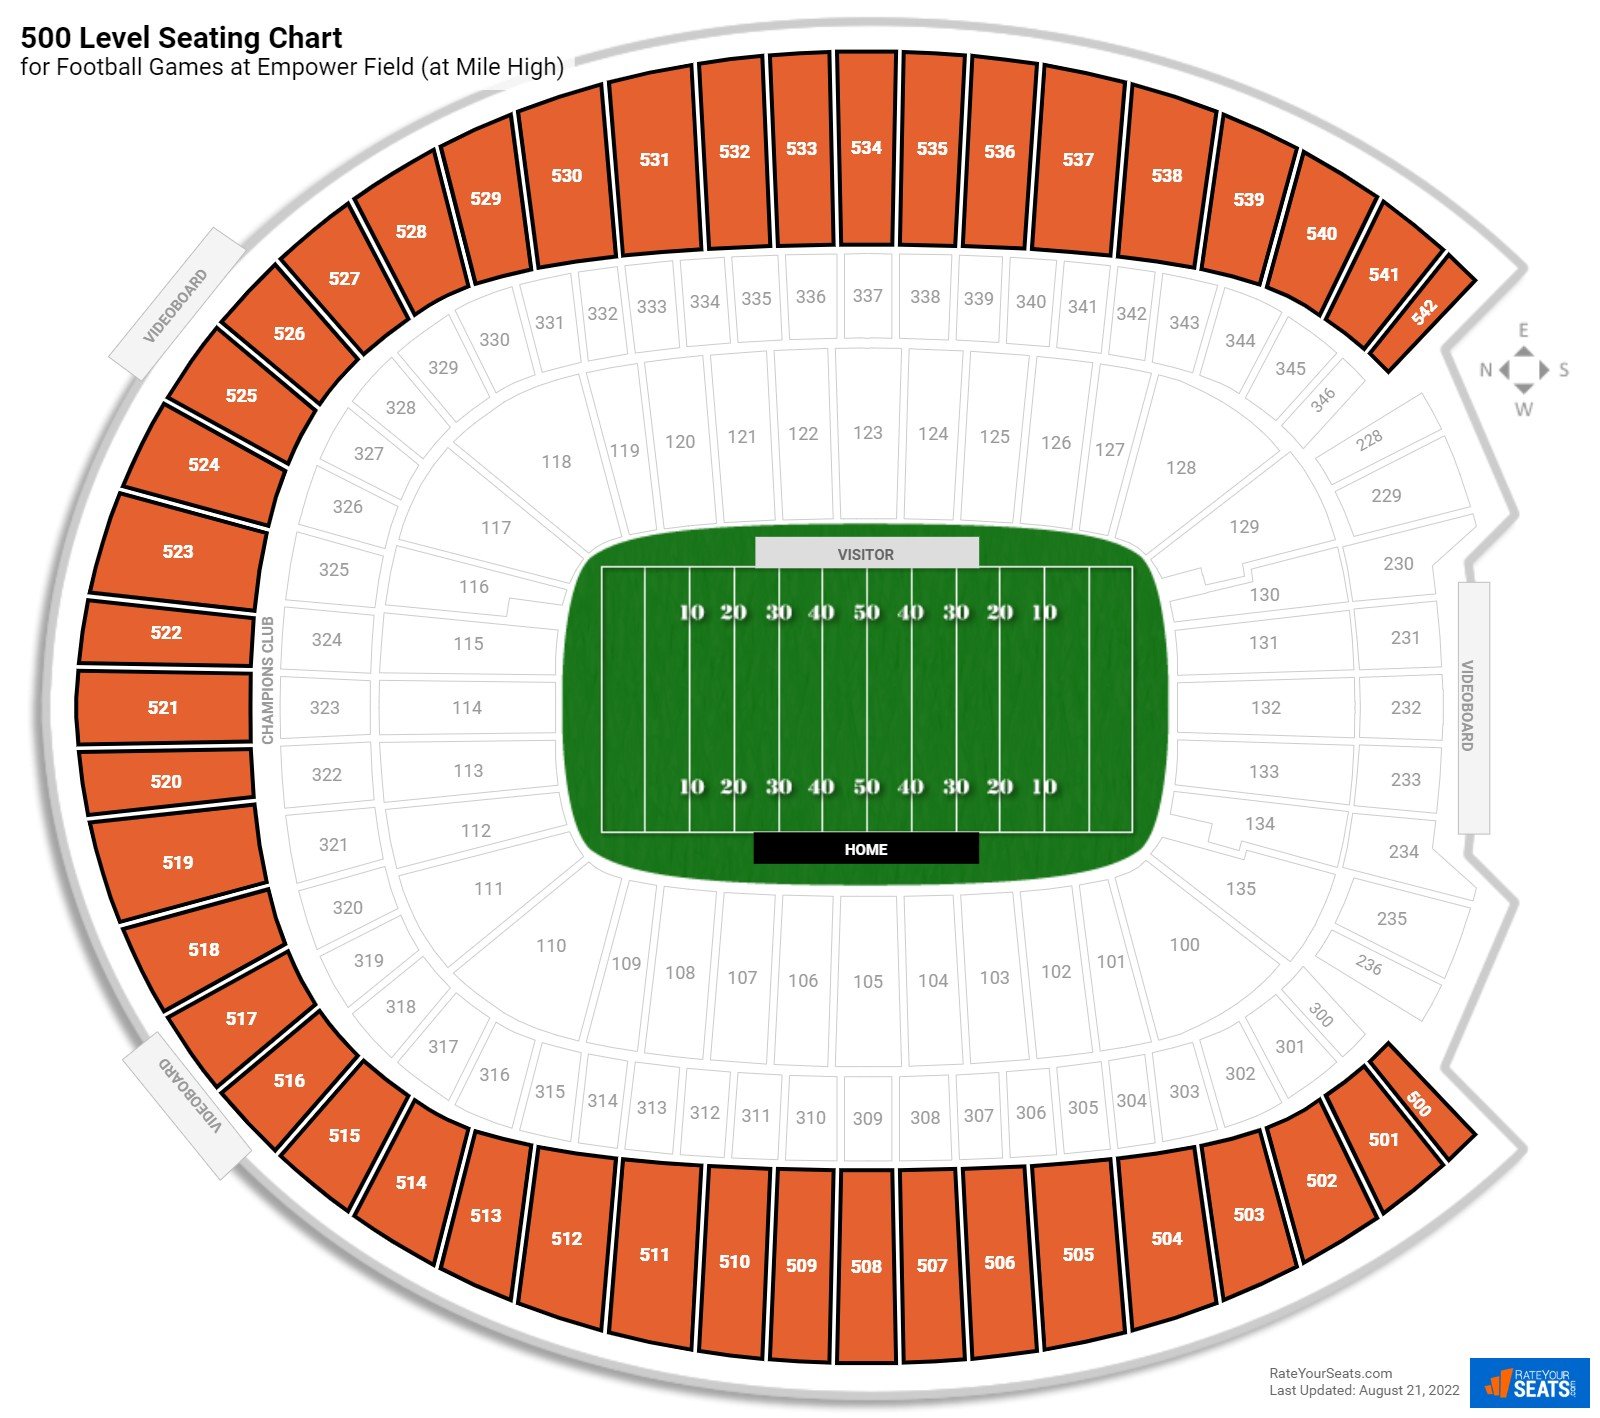 Football 500 Level Seating Chart at Empower Field (at Mile High)